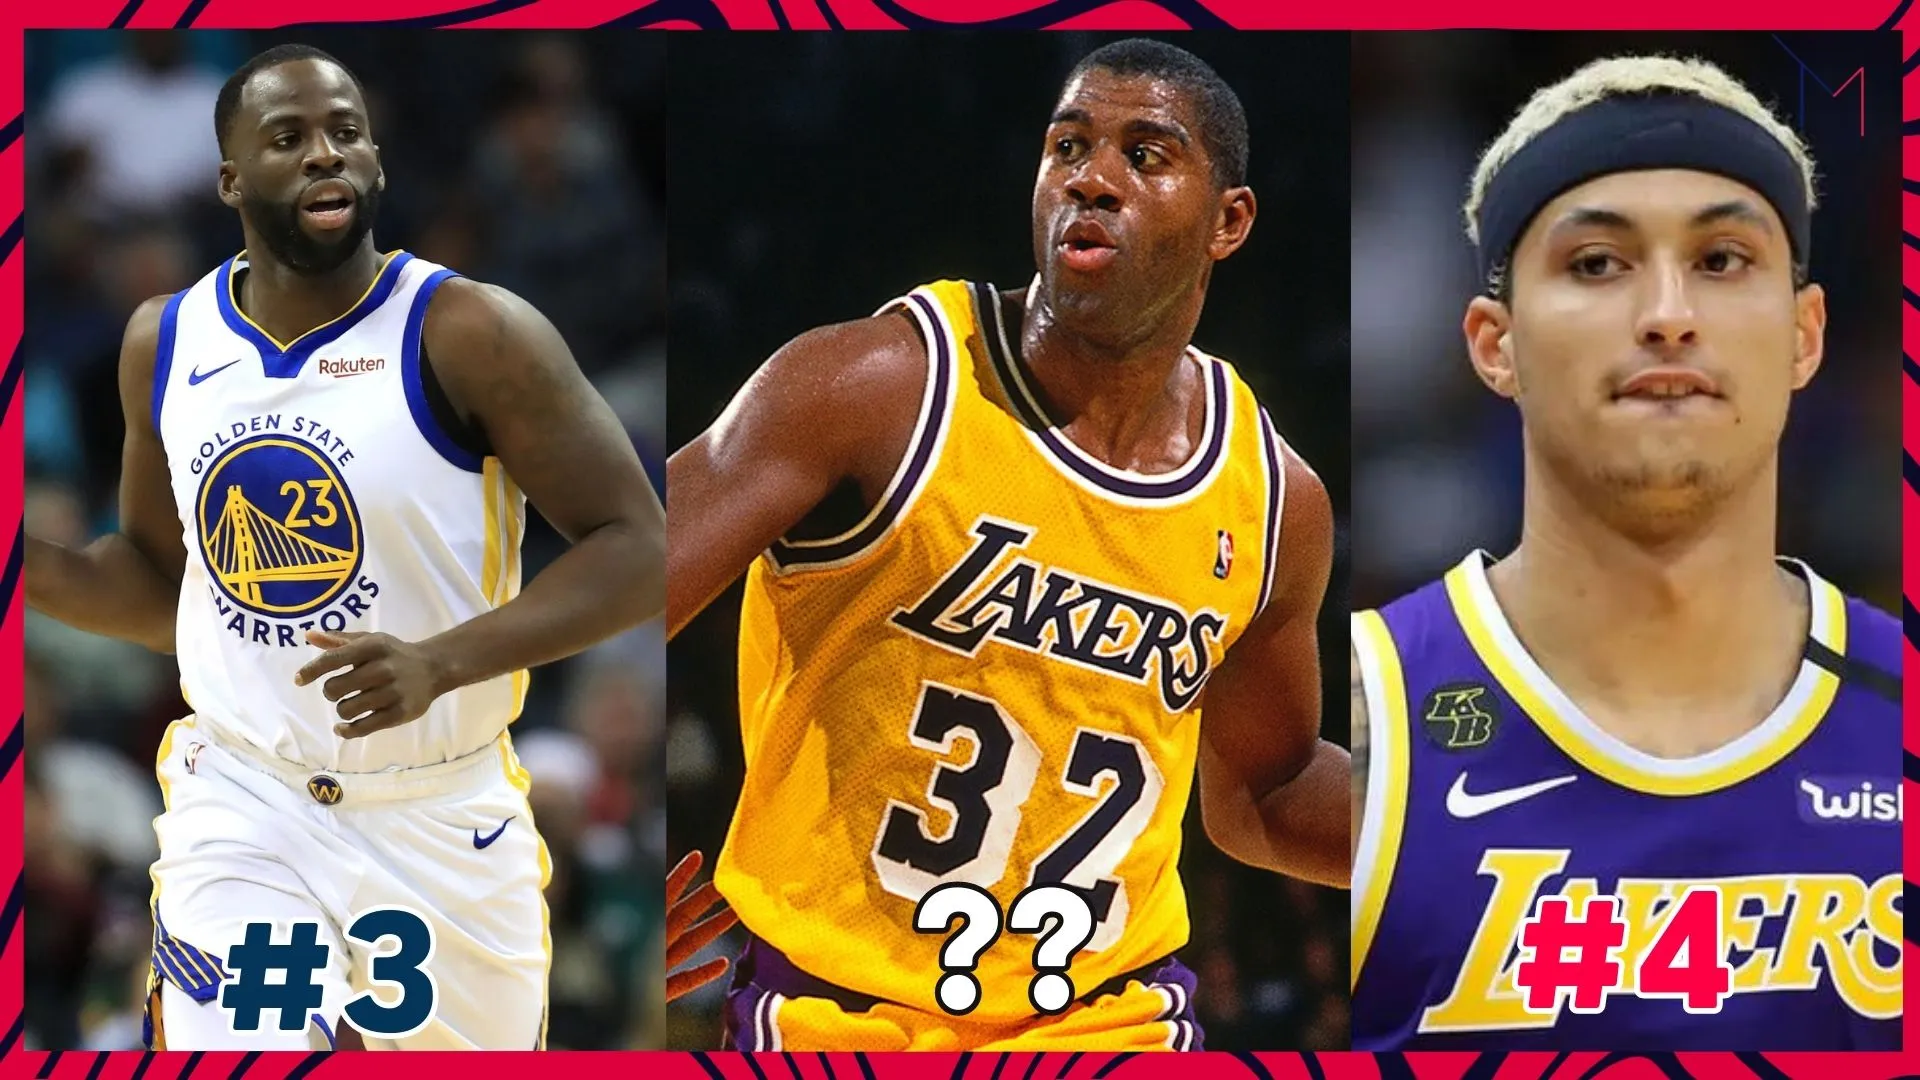 Top 10 most popular basketball players from Michigan - Famous NBA players from Michigan